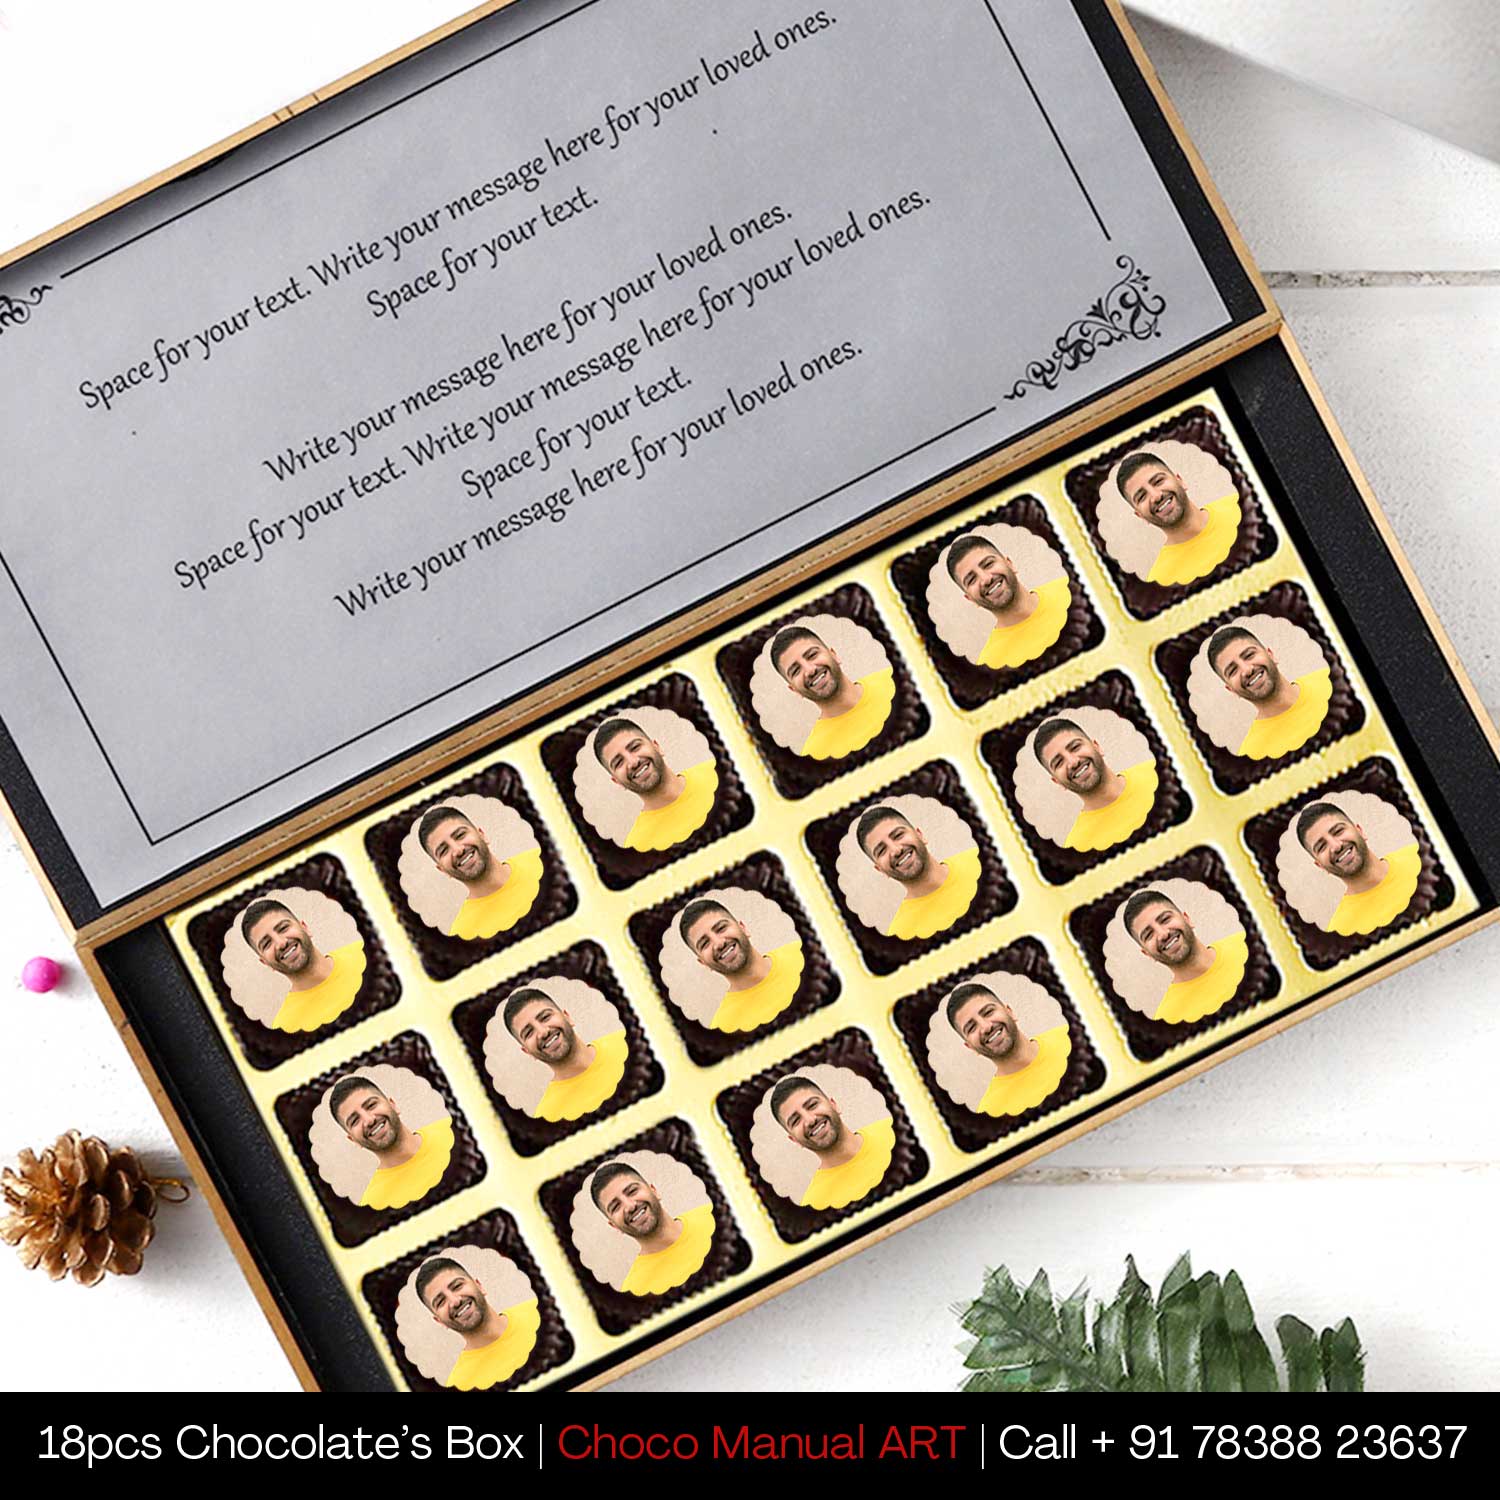 personalised chocolates with names personalized chocolates for birthday customised chocolate wrapper name on chocolate name on chocolate bar customised chocolates near me chocolate with photo printed on it